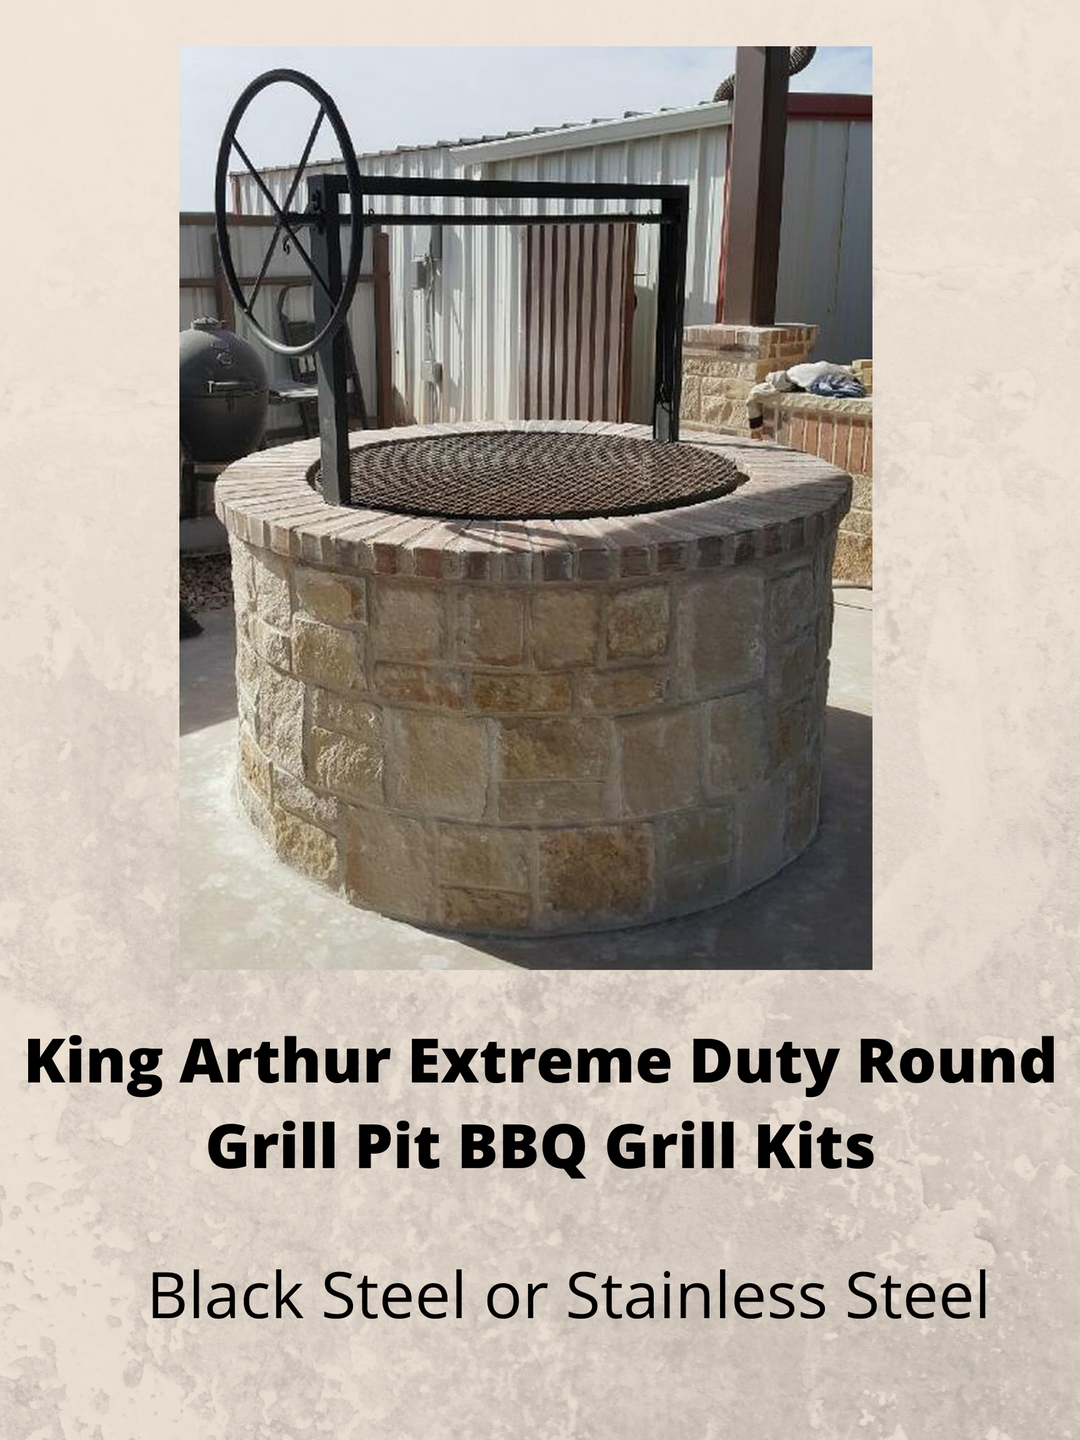 King Arthur Extreme Duty Round Architectural Grill